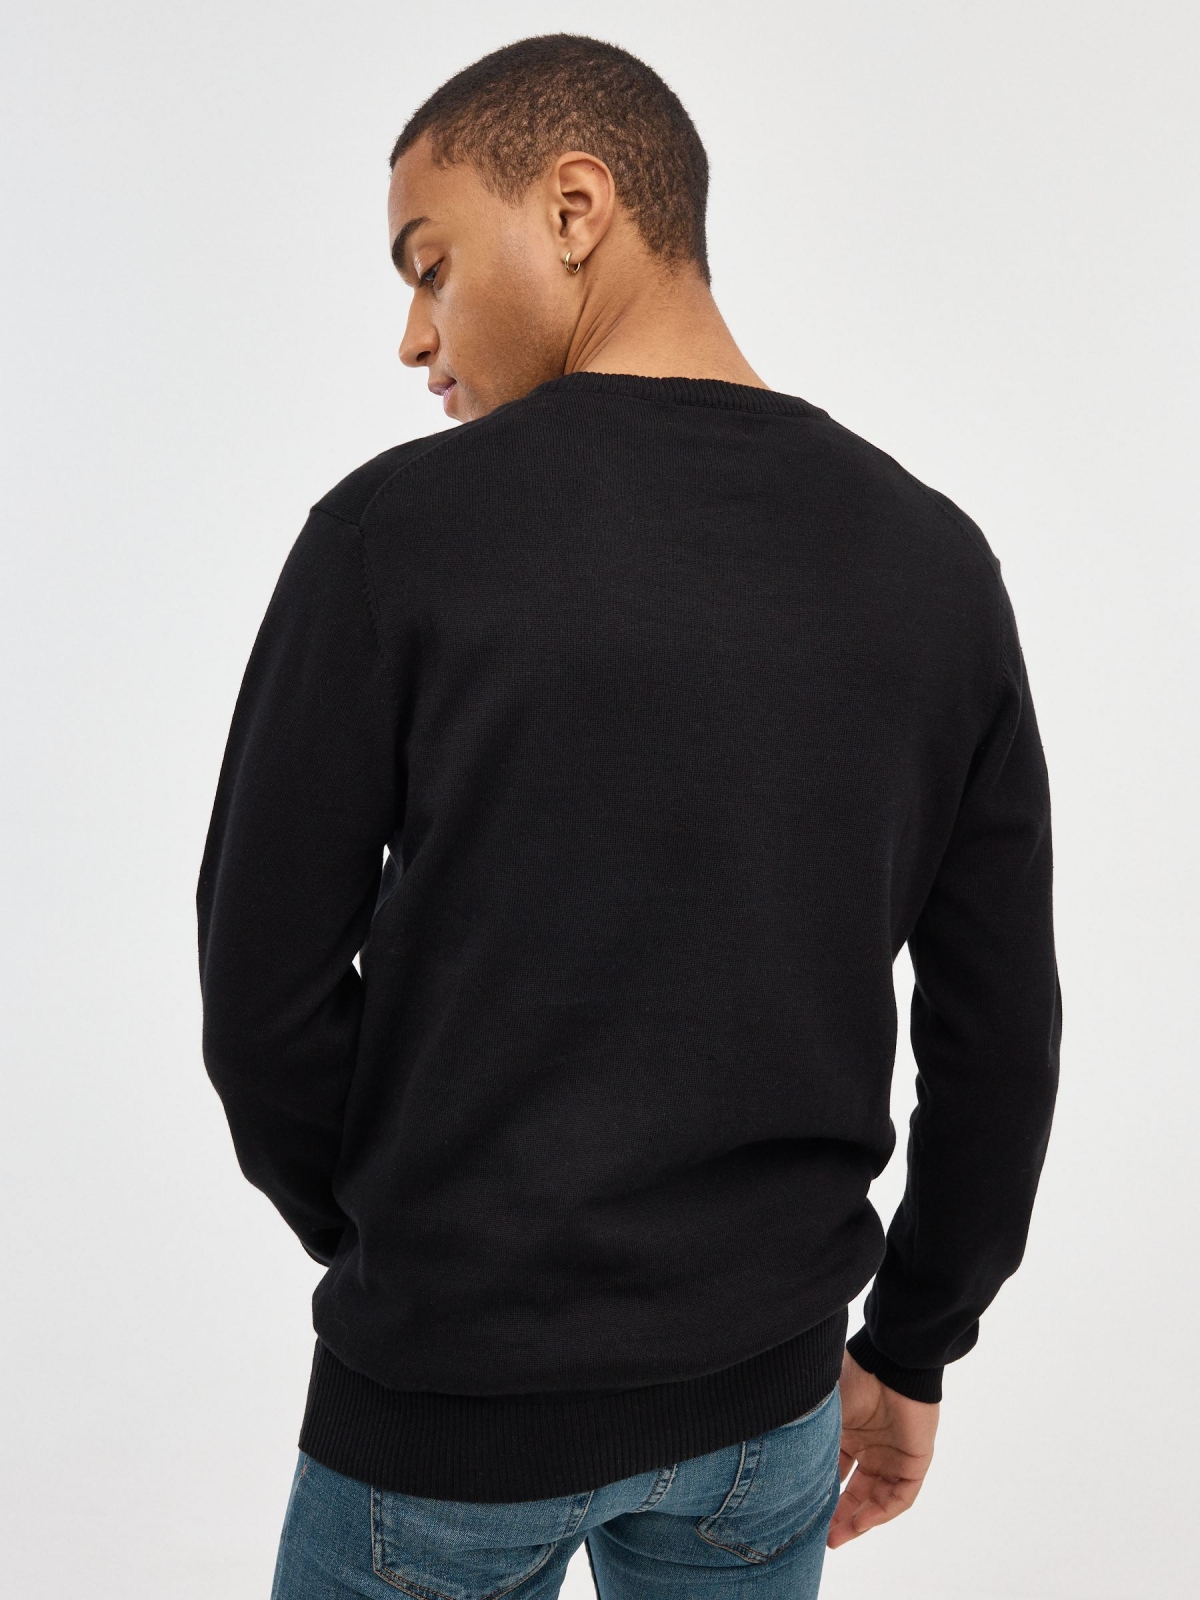 Basic Navy Blue Sweater black middle back view